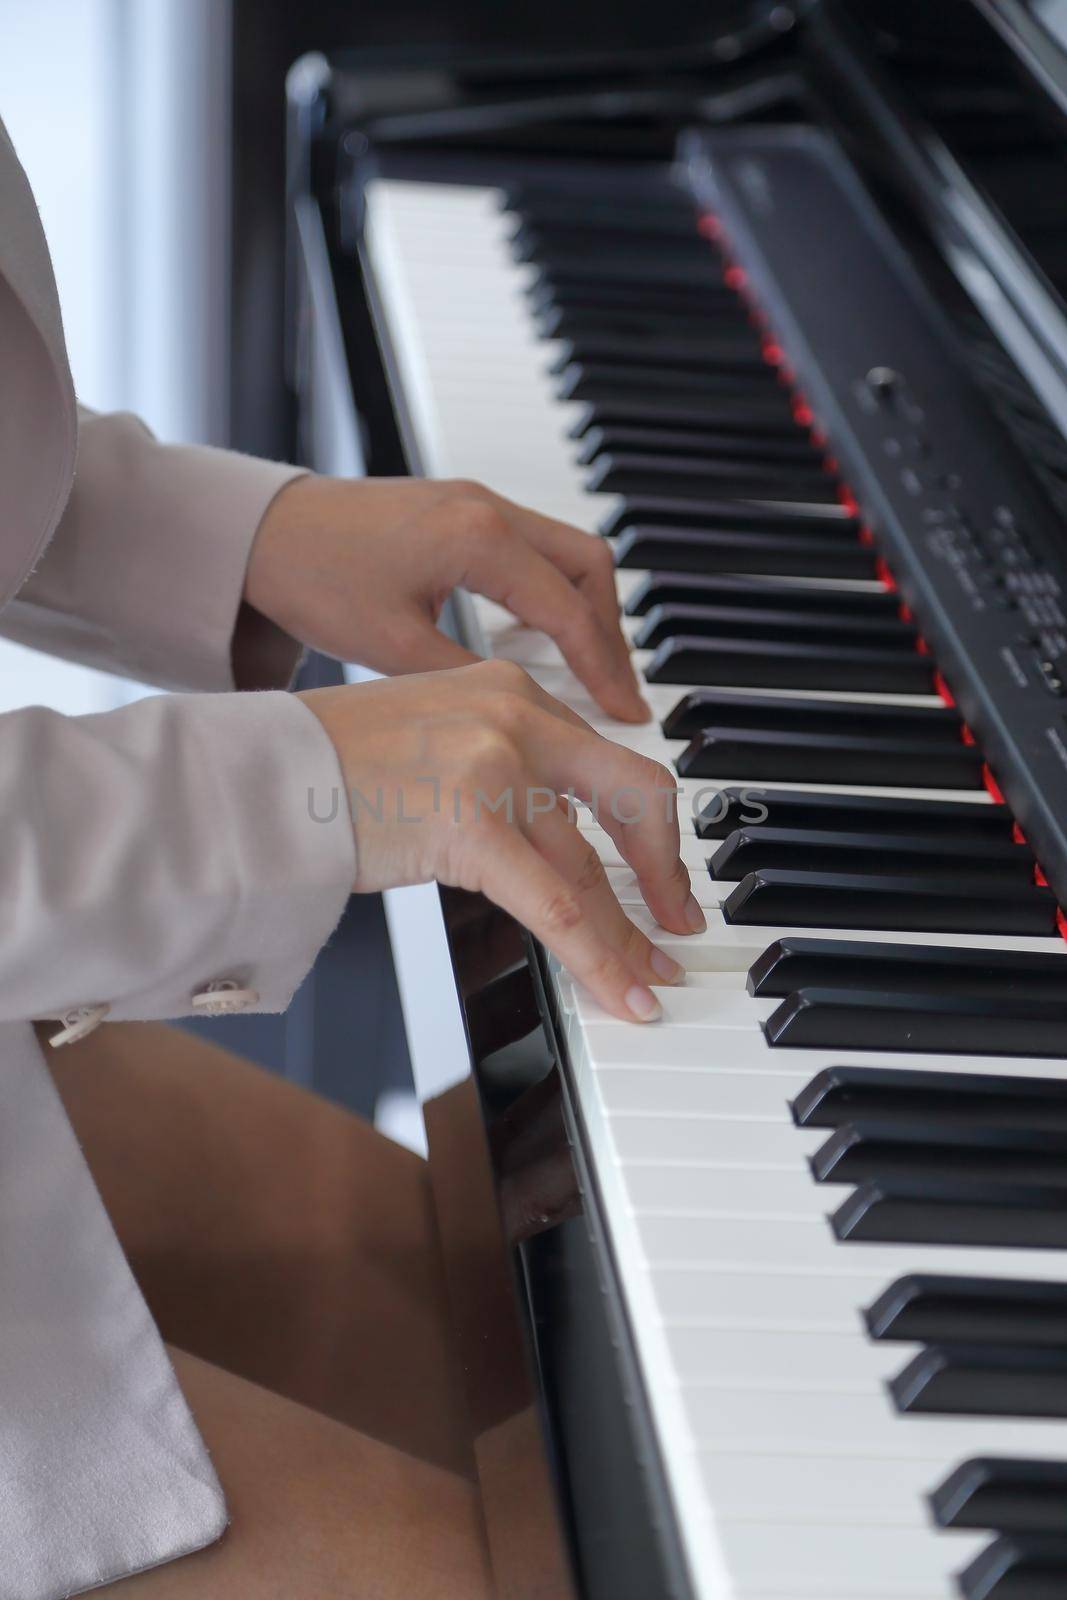 hands of a young woman playing piano